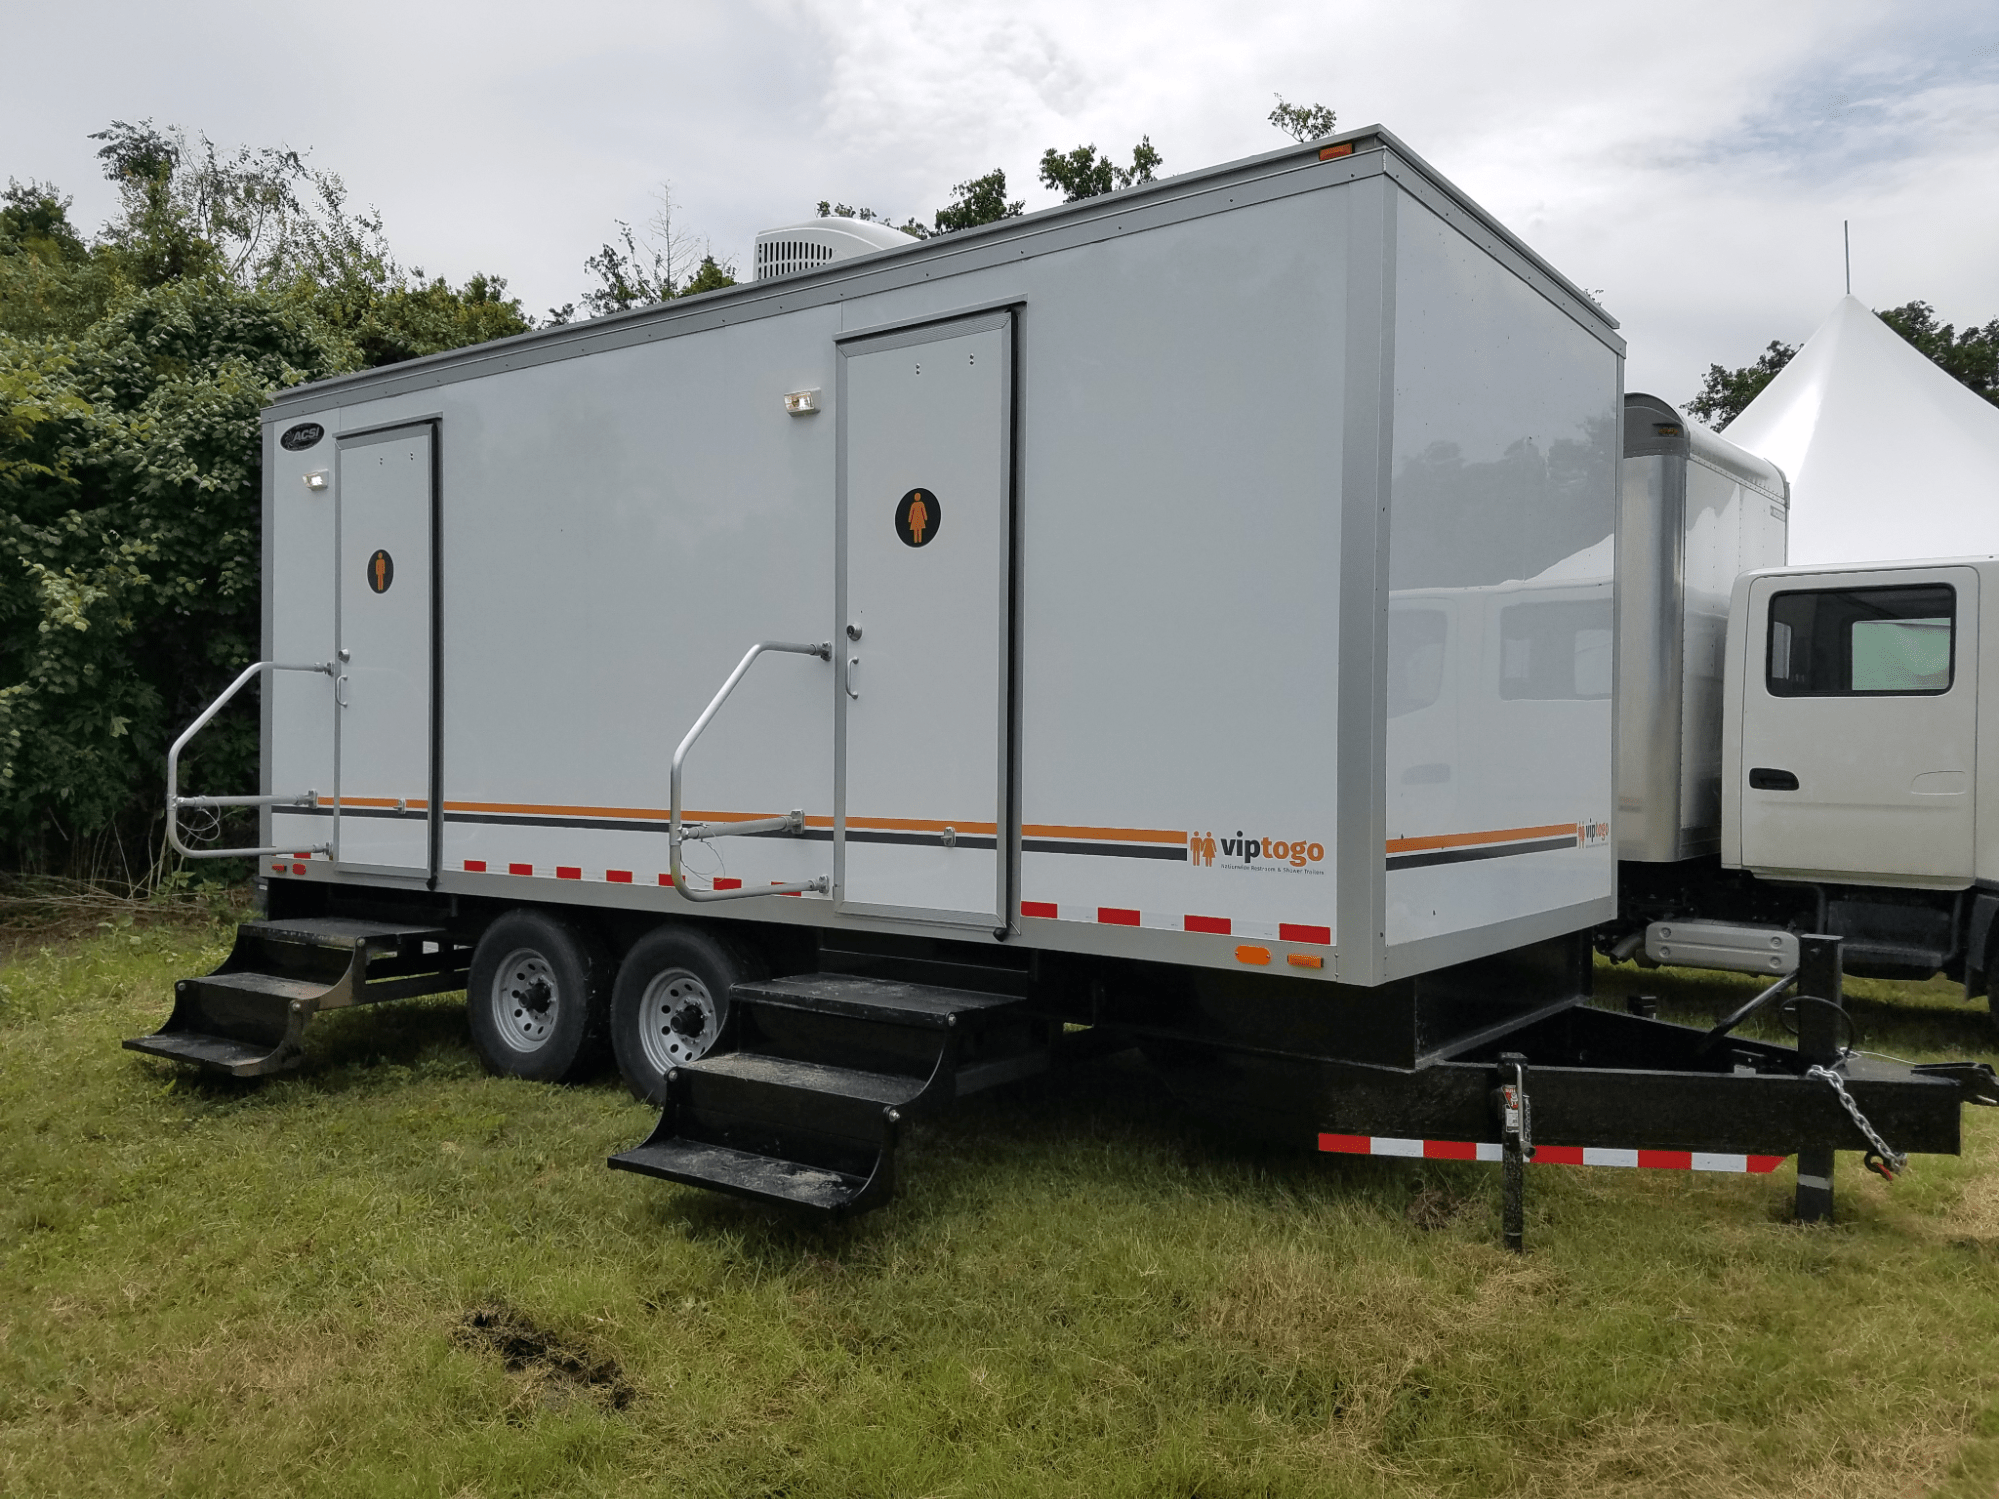 VIP To Go’s premium portable restroom trailer at an outdoor event